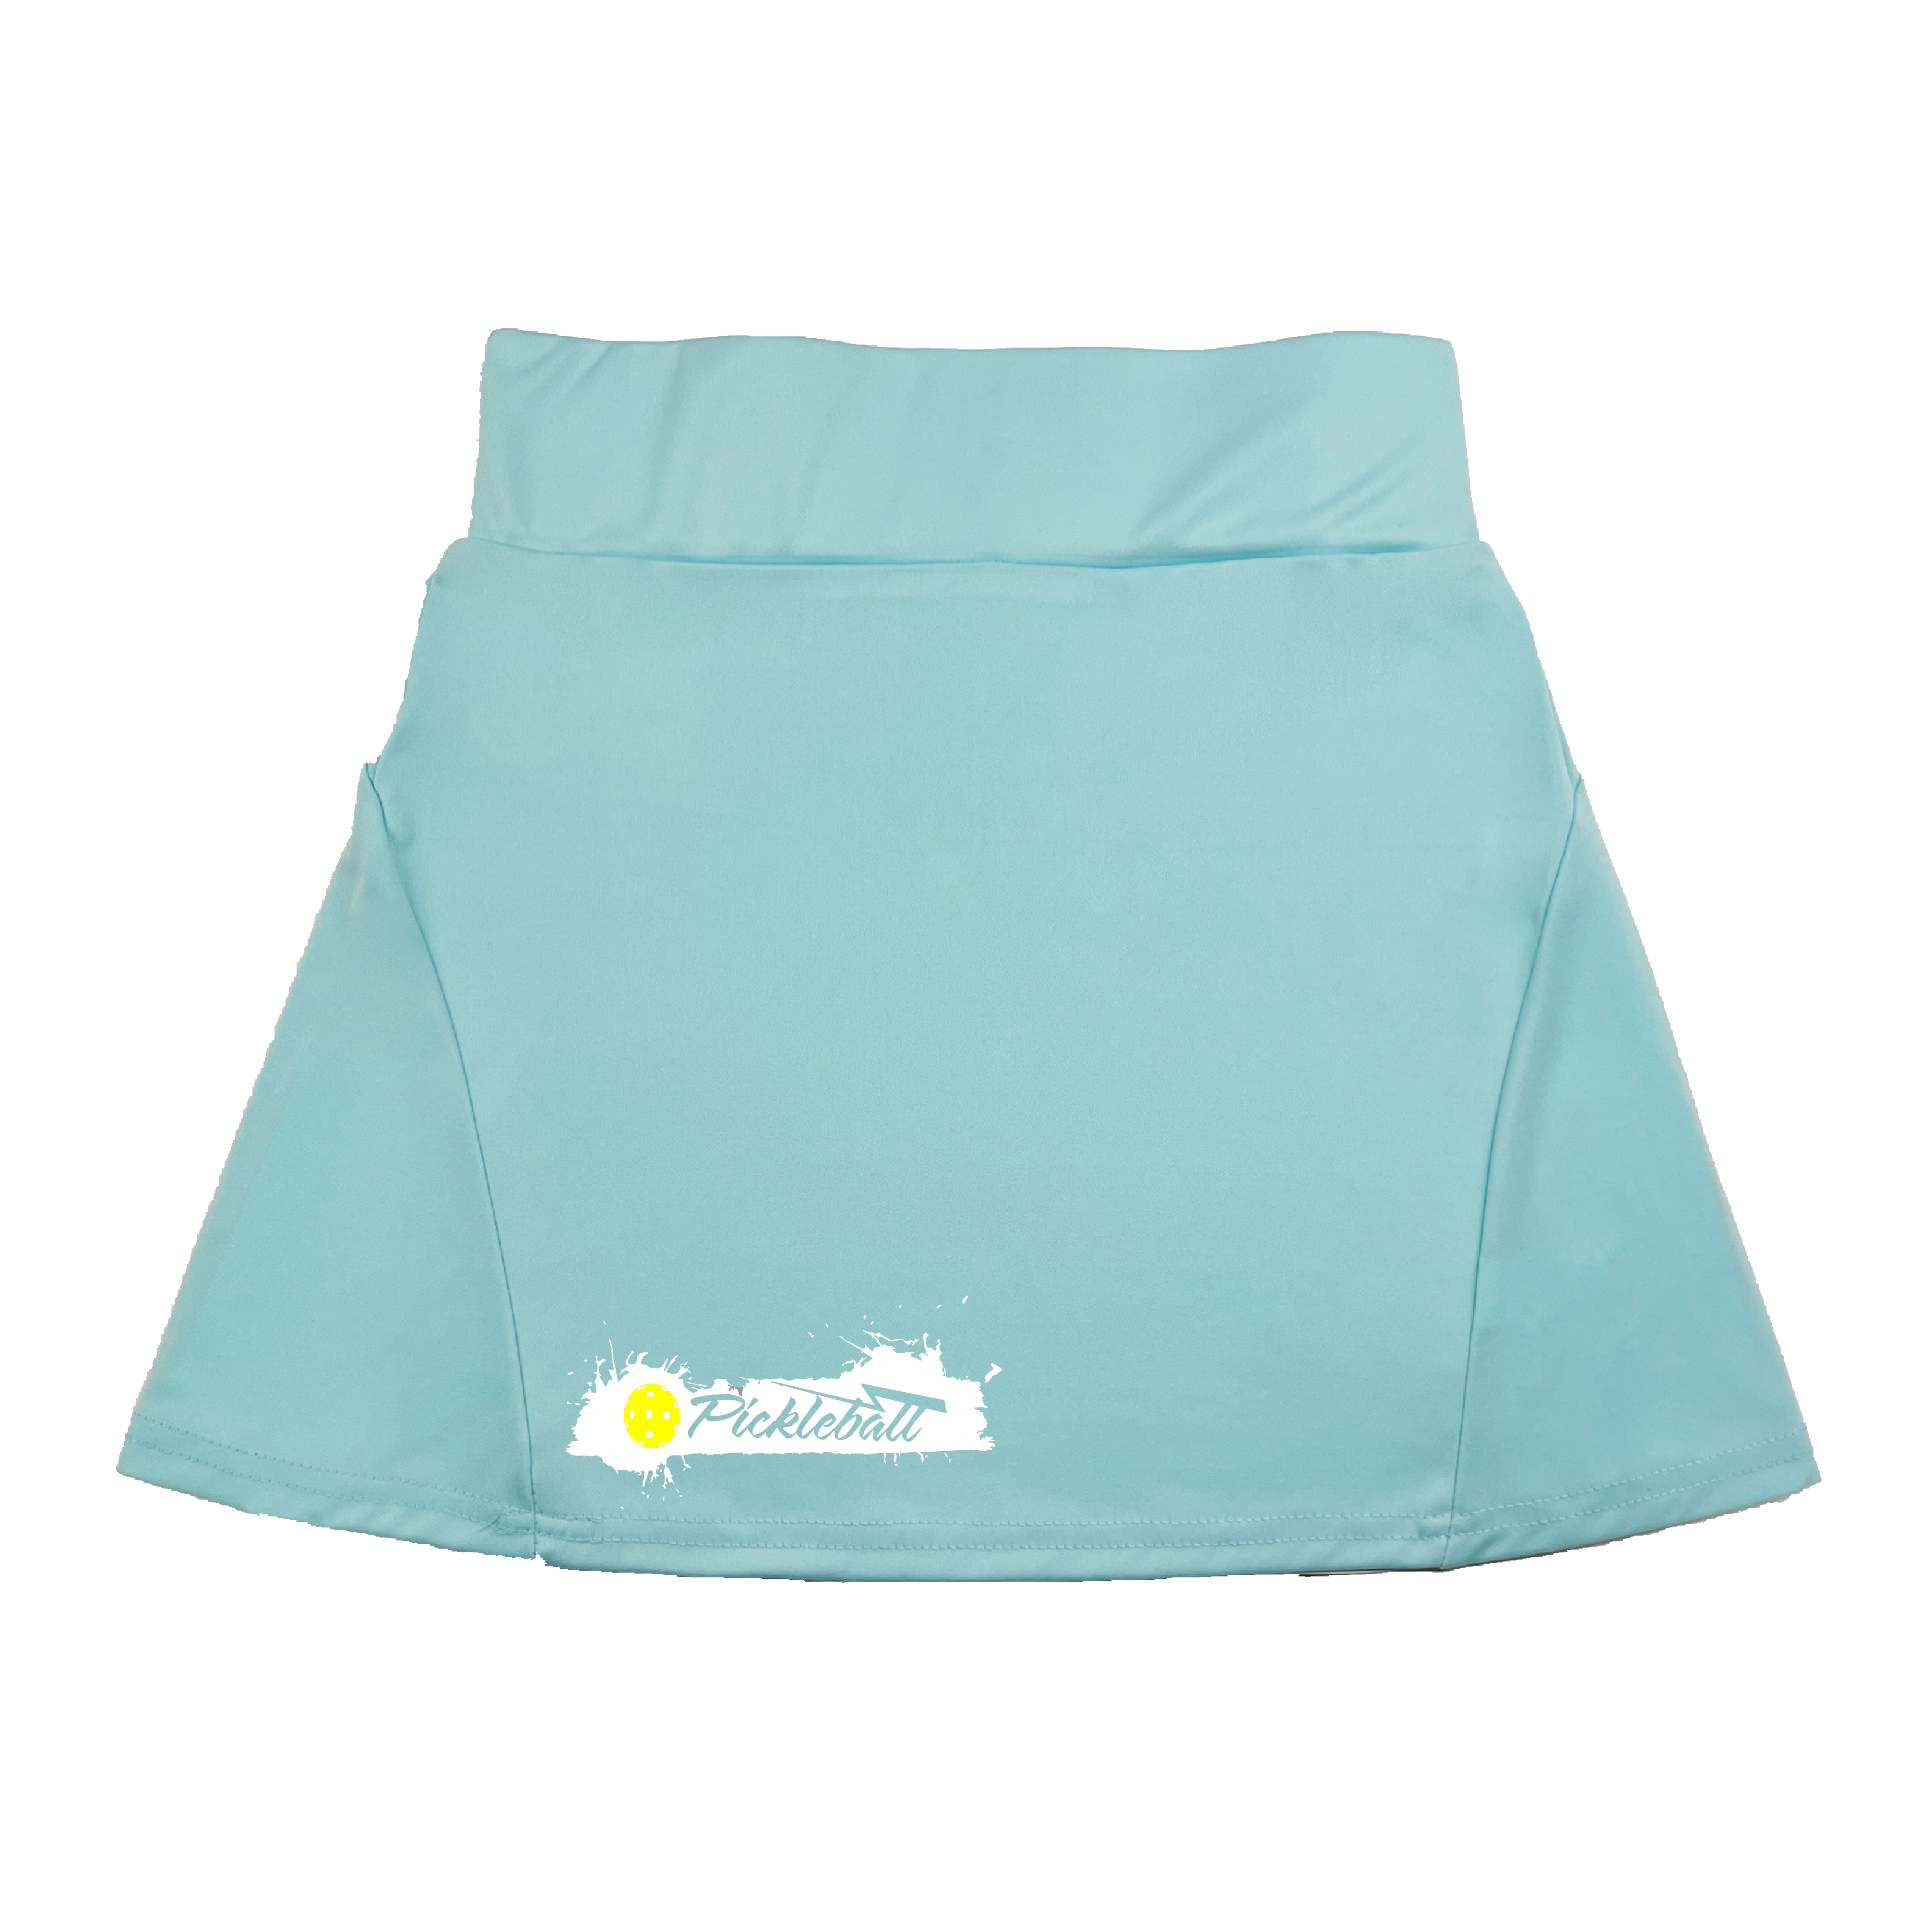 Pickleball Flirty Skort Design:  Pickleball Extreme.   These flirty skorts have a flat mid-rise waistband with a 3 inch waistband.  Light weight without being see through and the material wicks away moisture quickly.  Flirty pleats in the back with inner shorts for free movement and stylish coverage on the courts.  A functional zipper pocket on the back and two built in pockets on the shorts for convenient storage. 